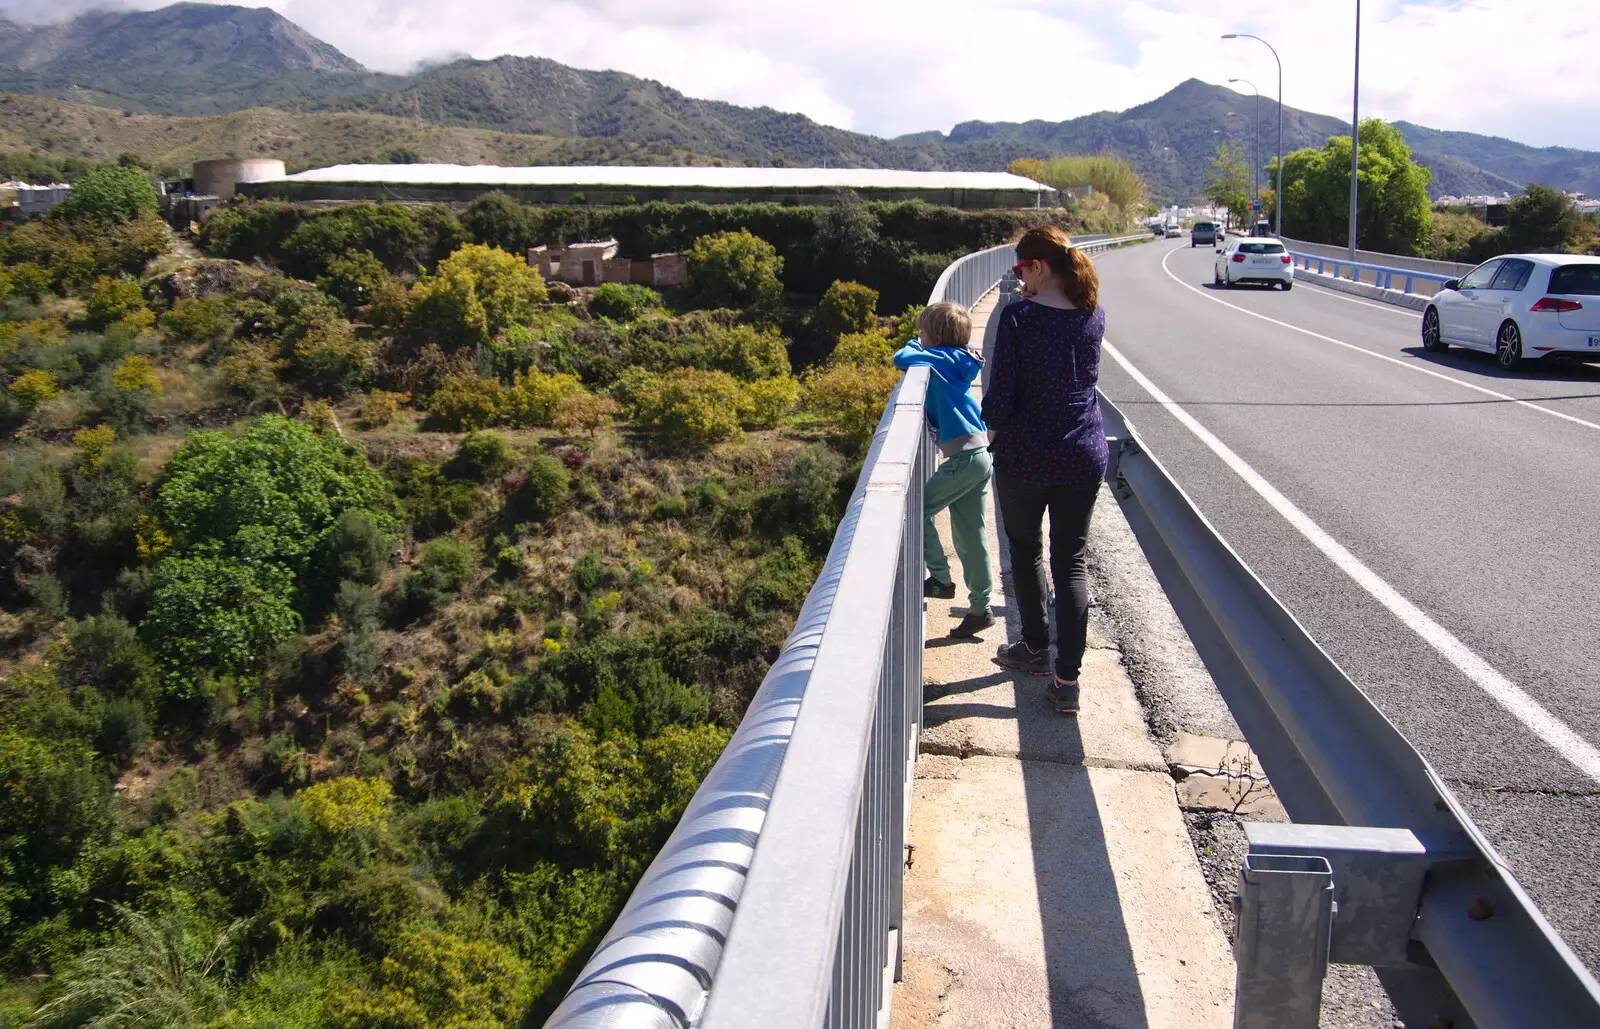 Harry and Isobel on a road bridge, from The Caves of Nerja, and Frigiliana, Andalusia, Spain - 18th April 2019